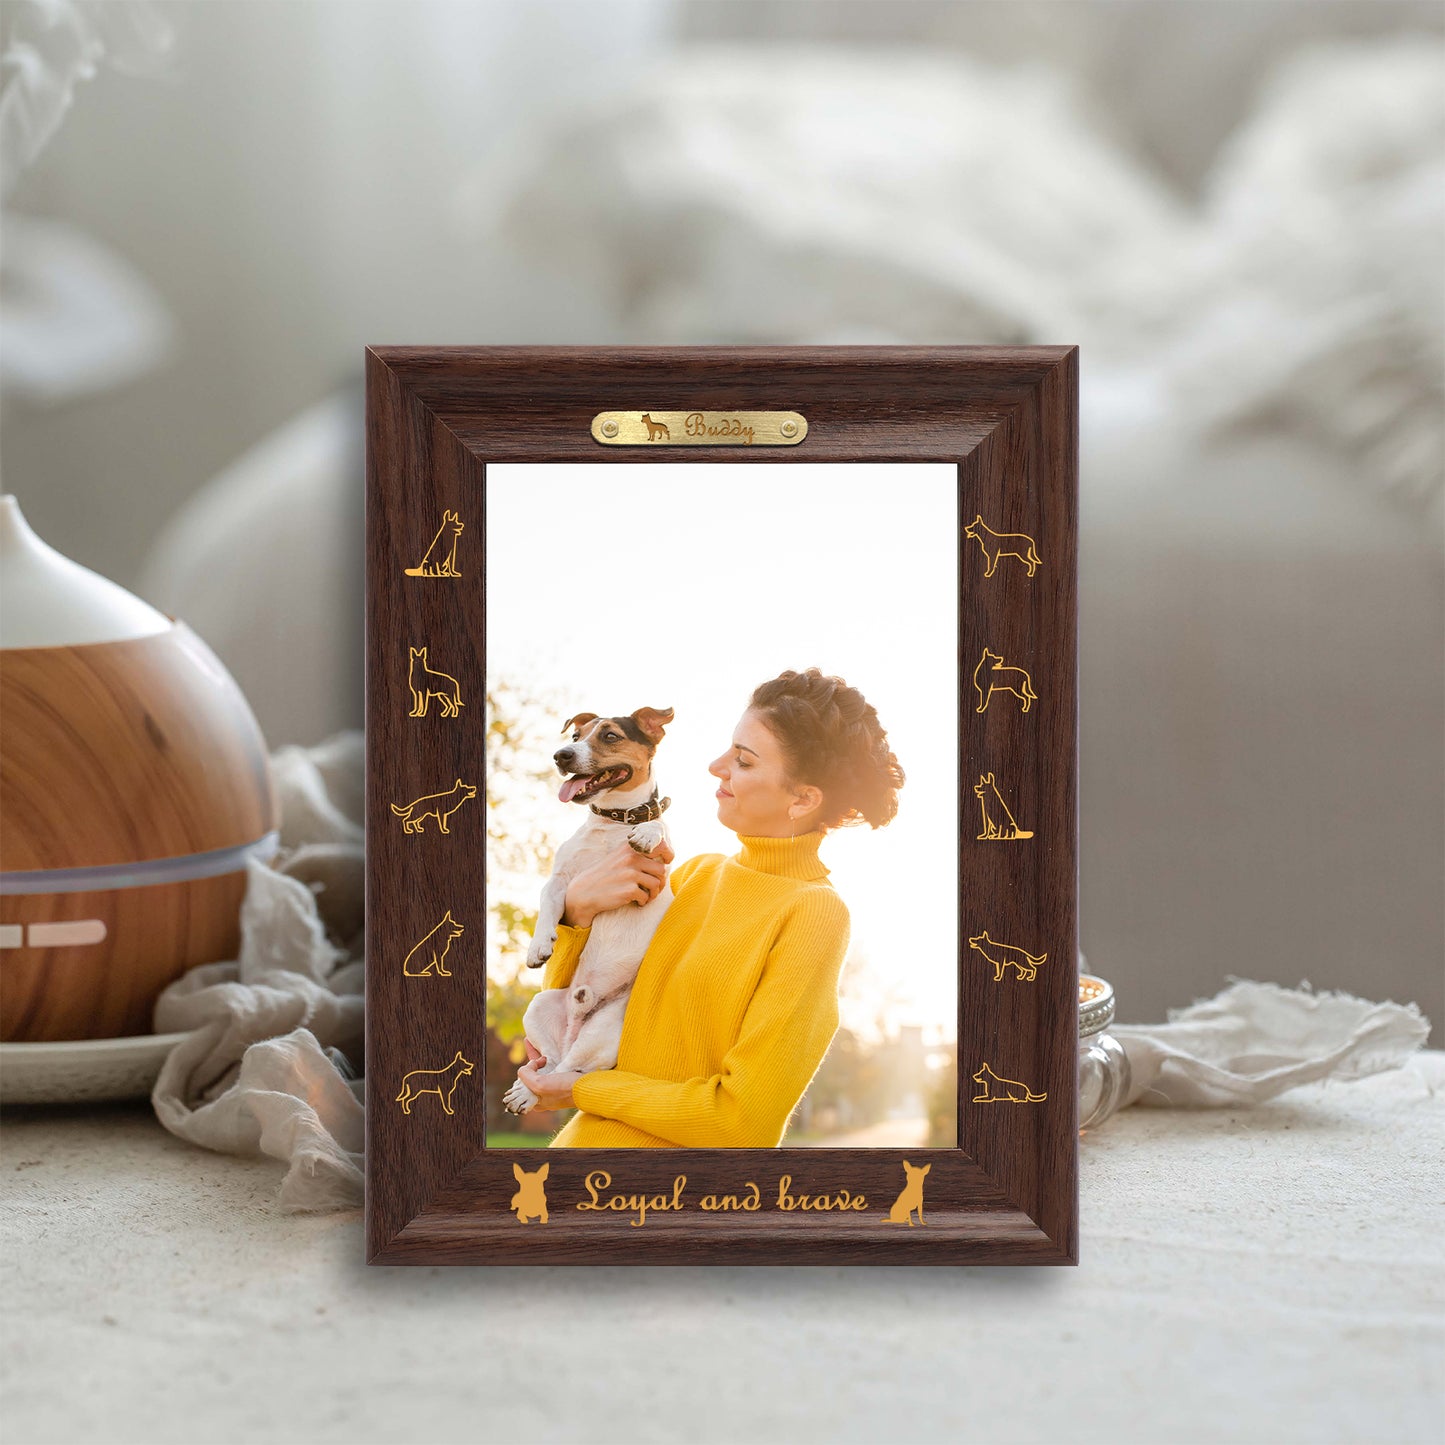 Dotride Custom Picture Frame, Wood Photo Frame with Custom Wooden Carving, Can be engraved with any text you want, suitable for Suitable for Various Themes, Dog